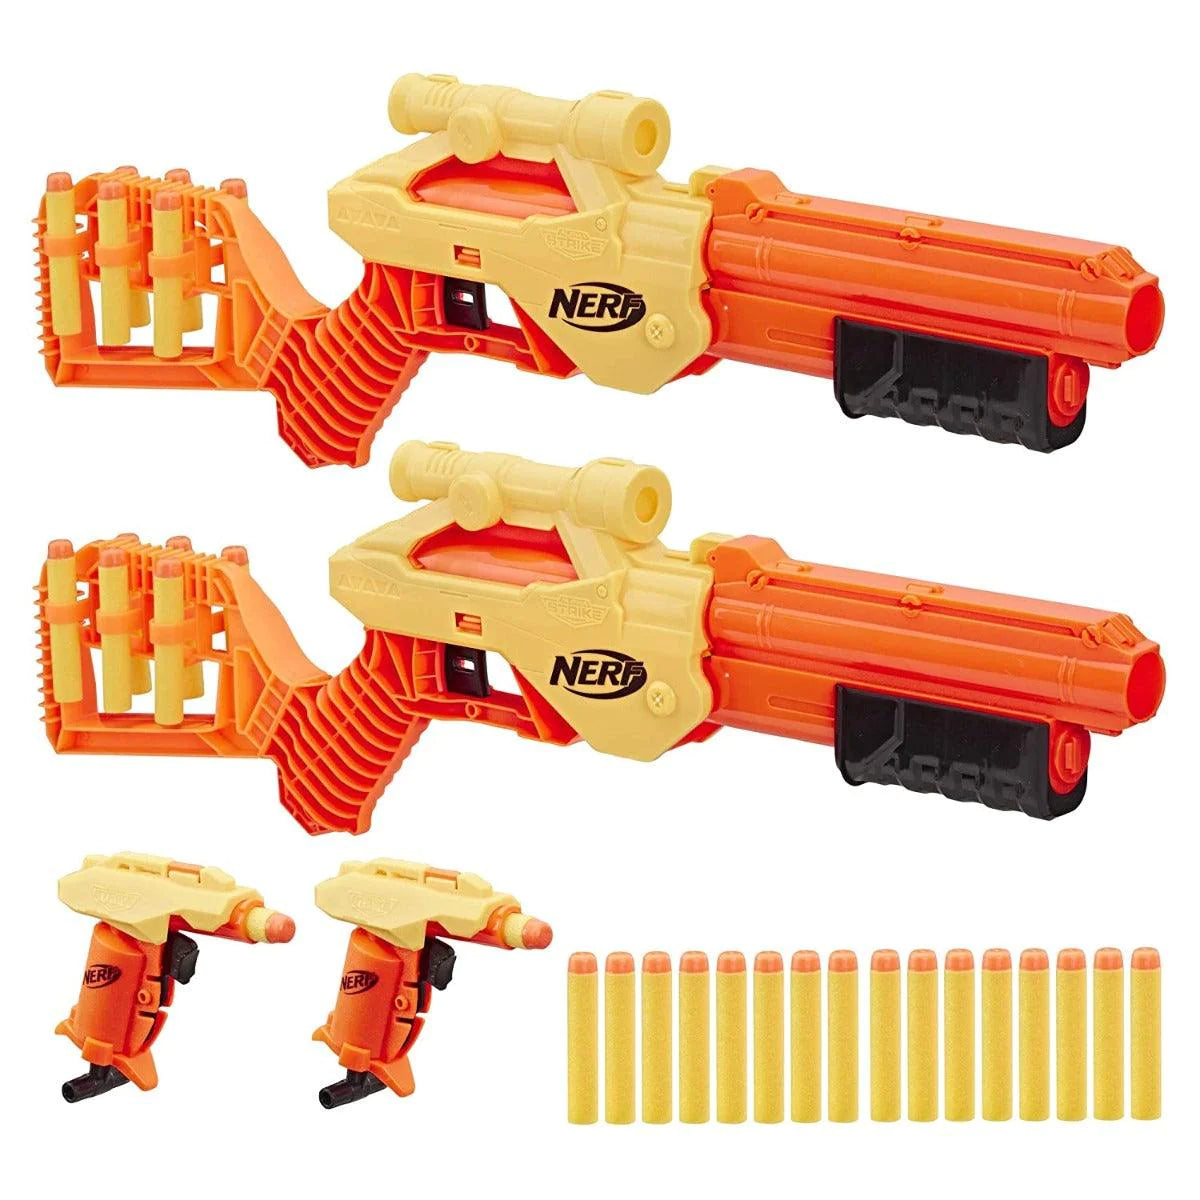 Nerf Alpha Strike Lynx SD-1 And Stinger SD-1 Multi-Pack - Includes 4 Blasters And 26 Official Nerf Elite Darts -- For Kids, Teens, Adults